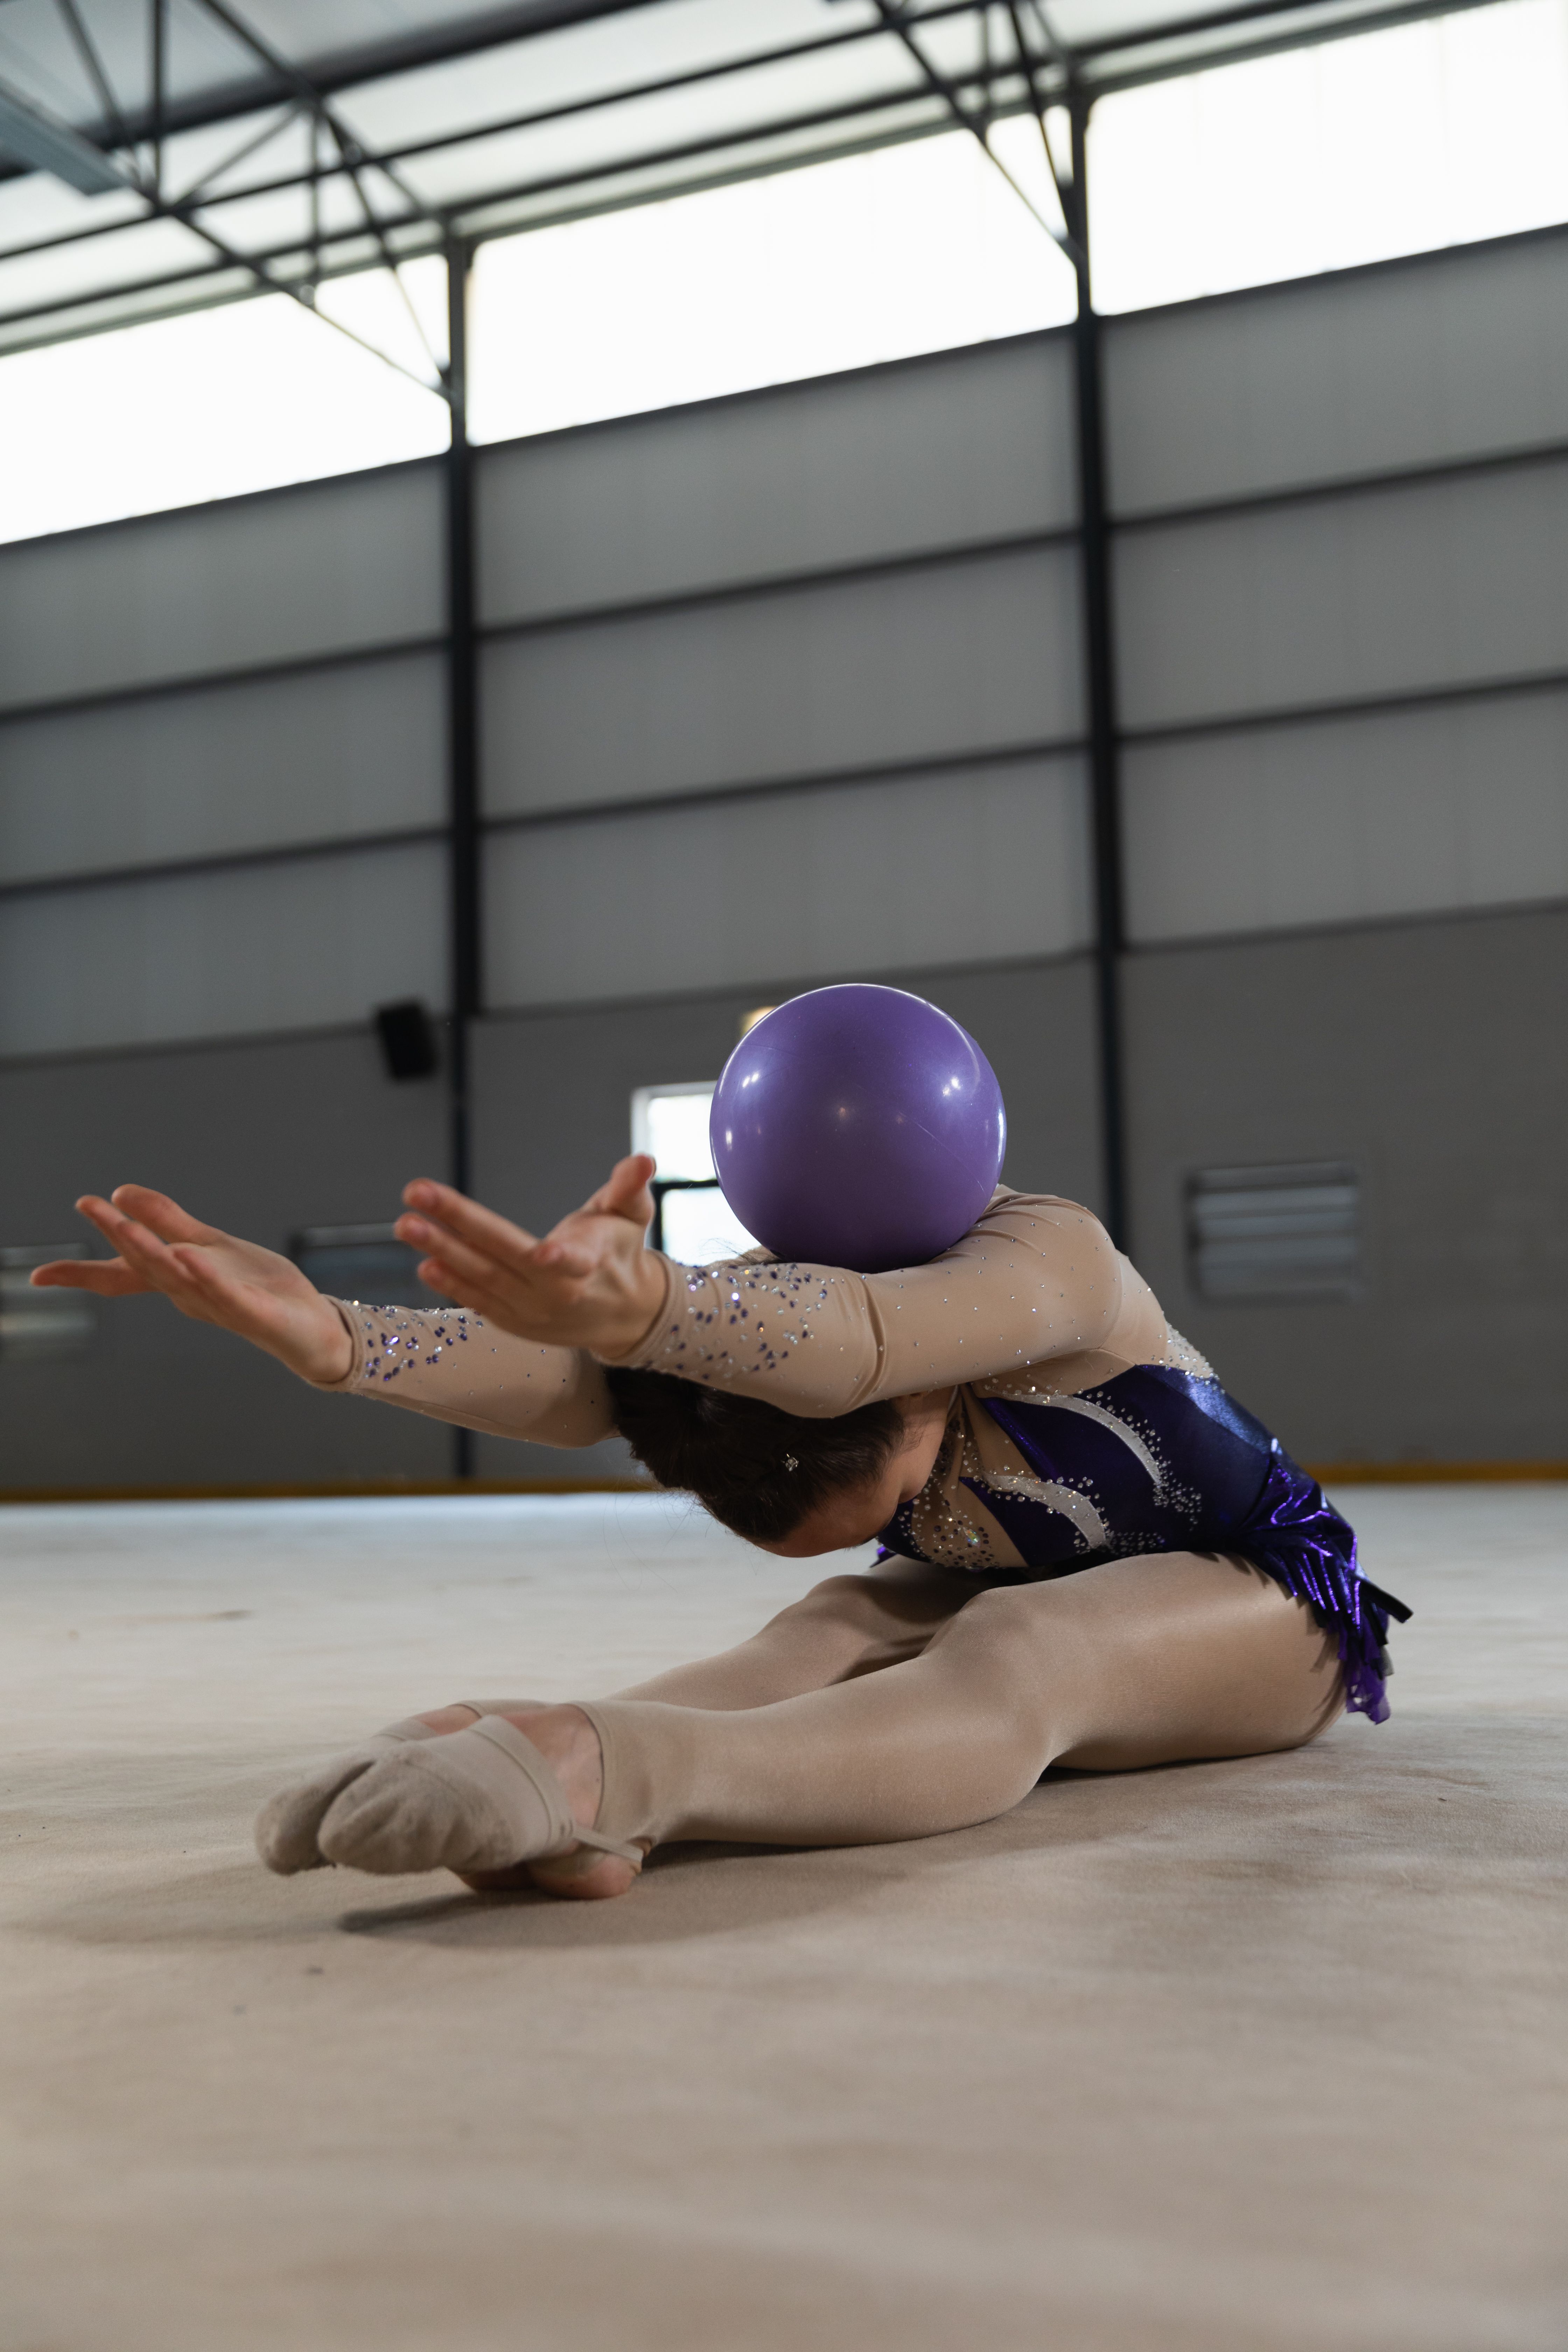 A gymnast stretches on the floor with a purple ball on her face - Gymnastics